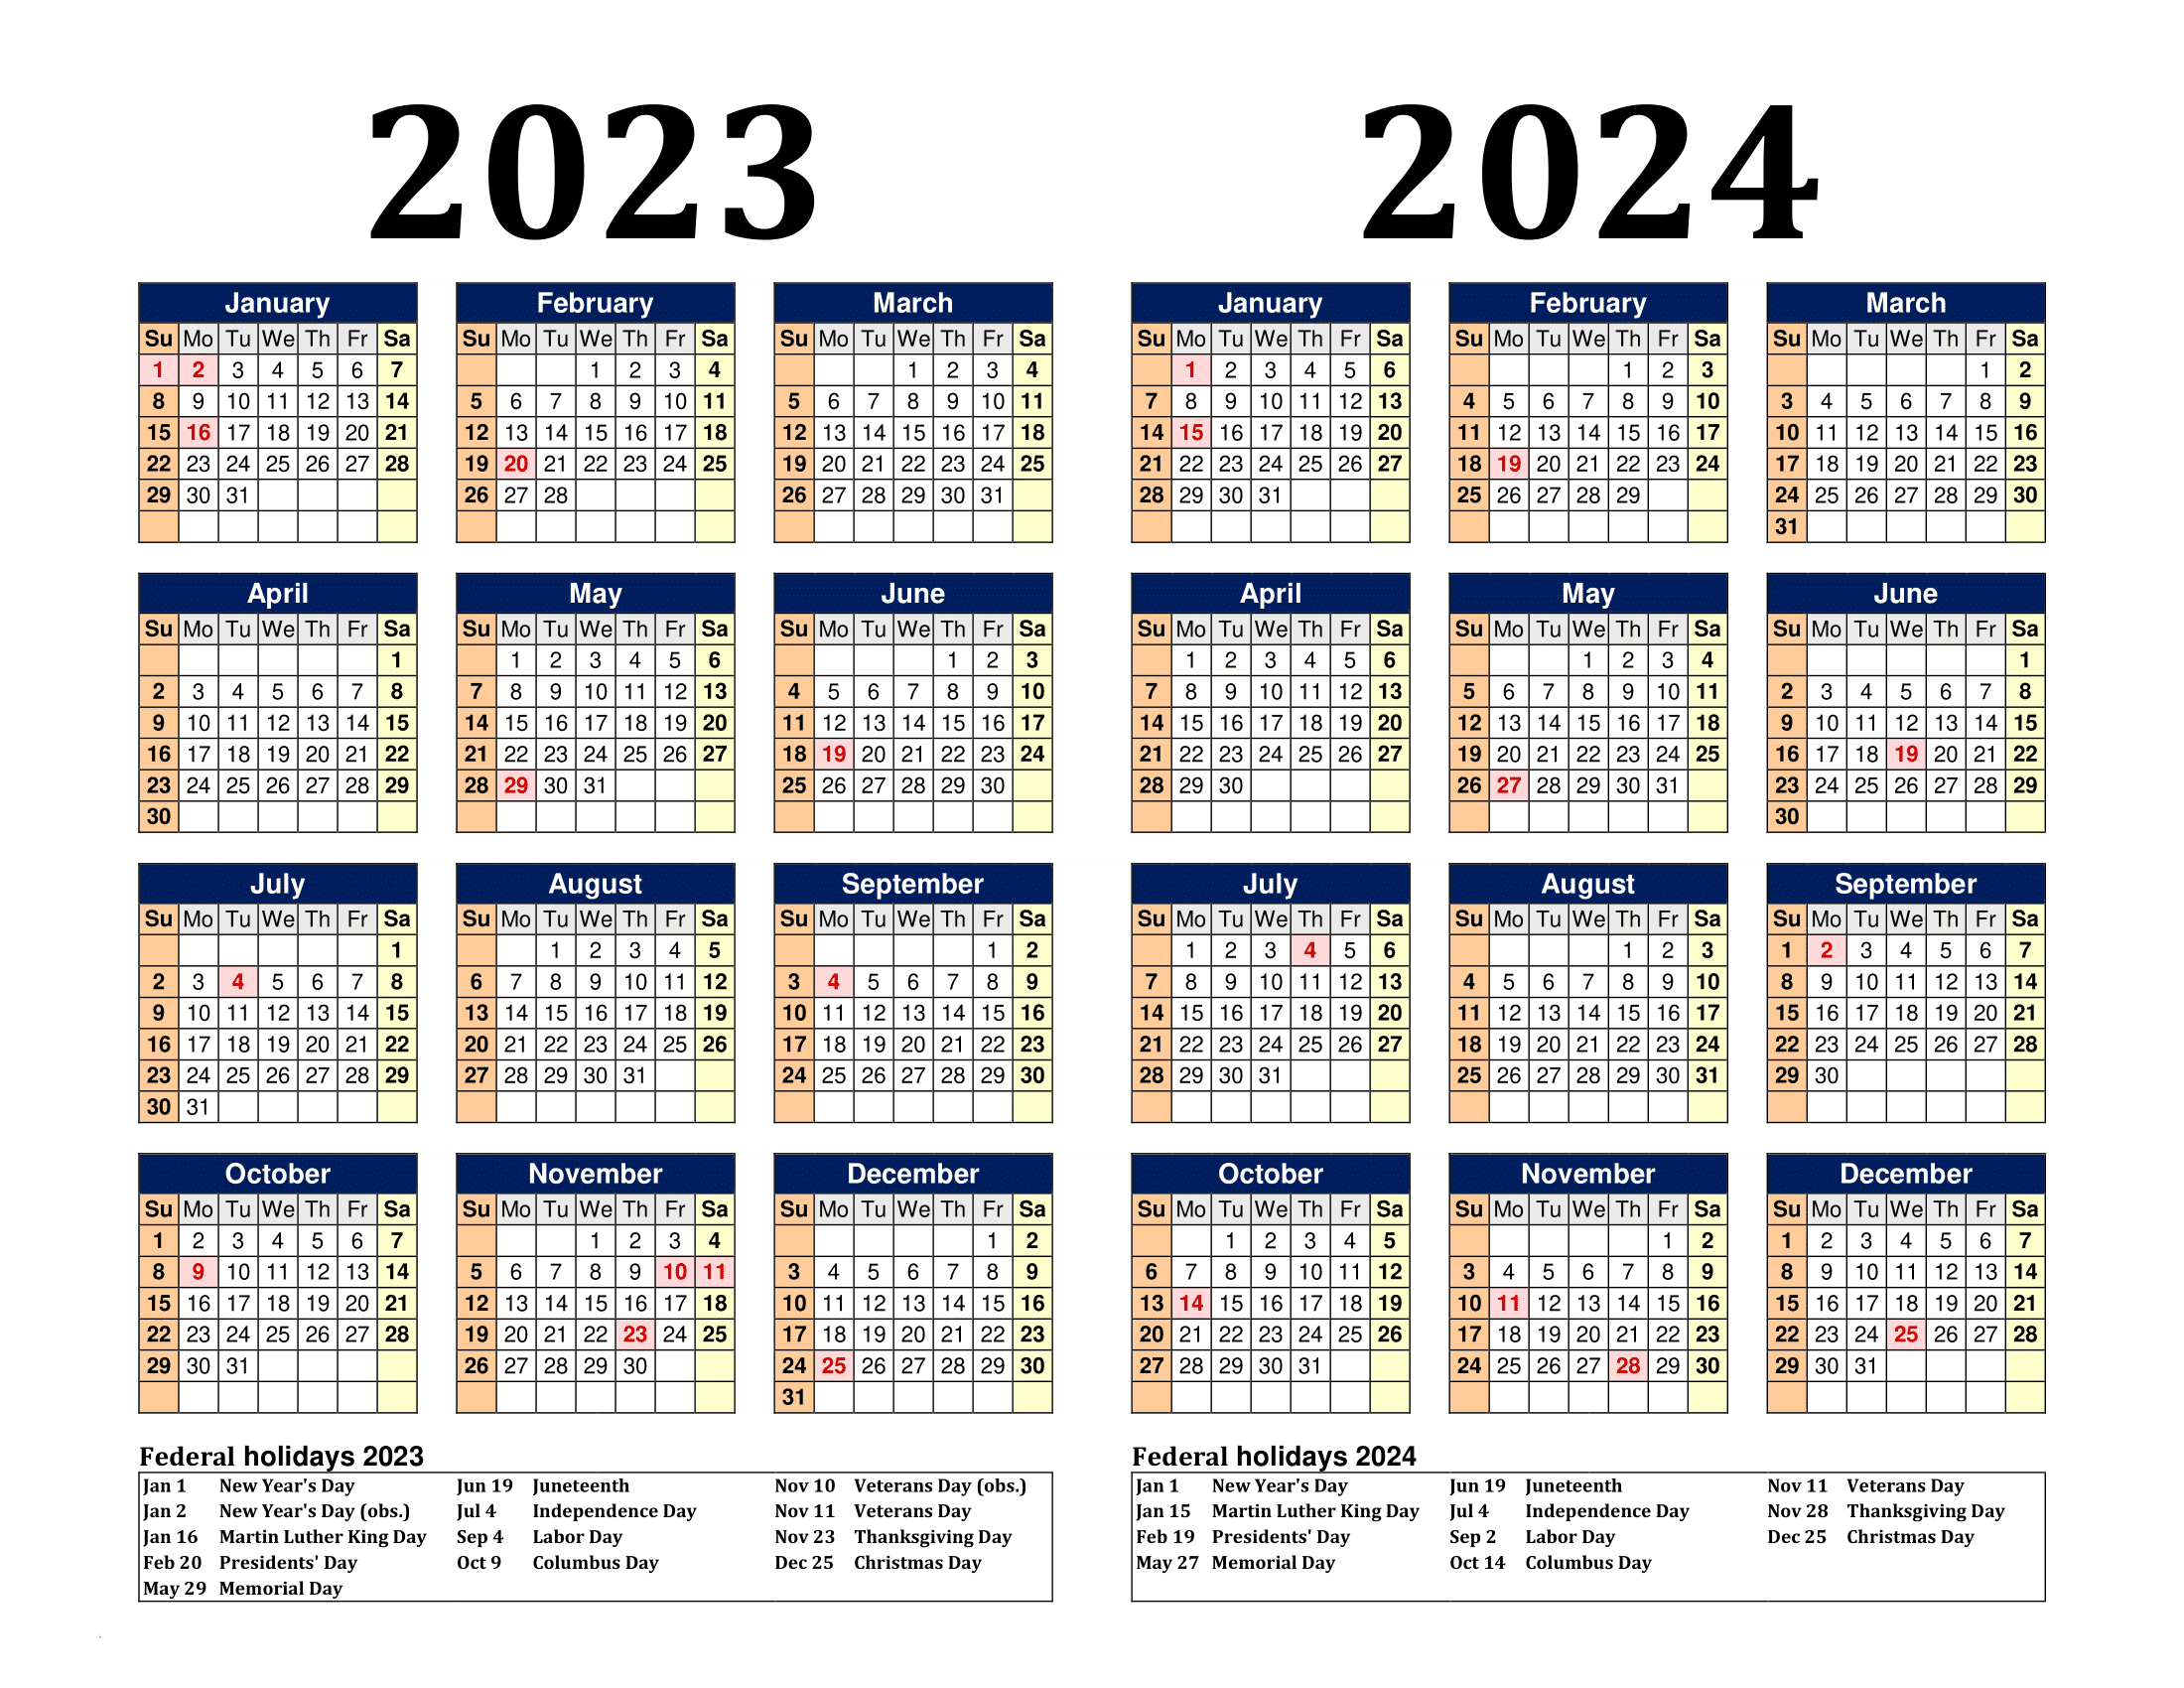 Free Printable Two Year Calendar Templates For 2023 And 2024 In Pdf | Printable Calendar For 2023 2024